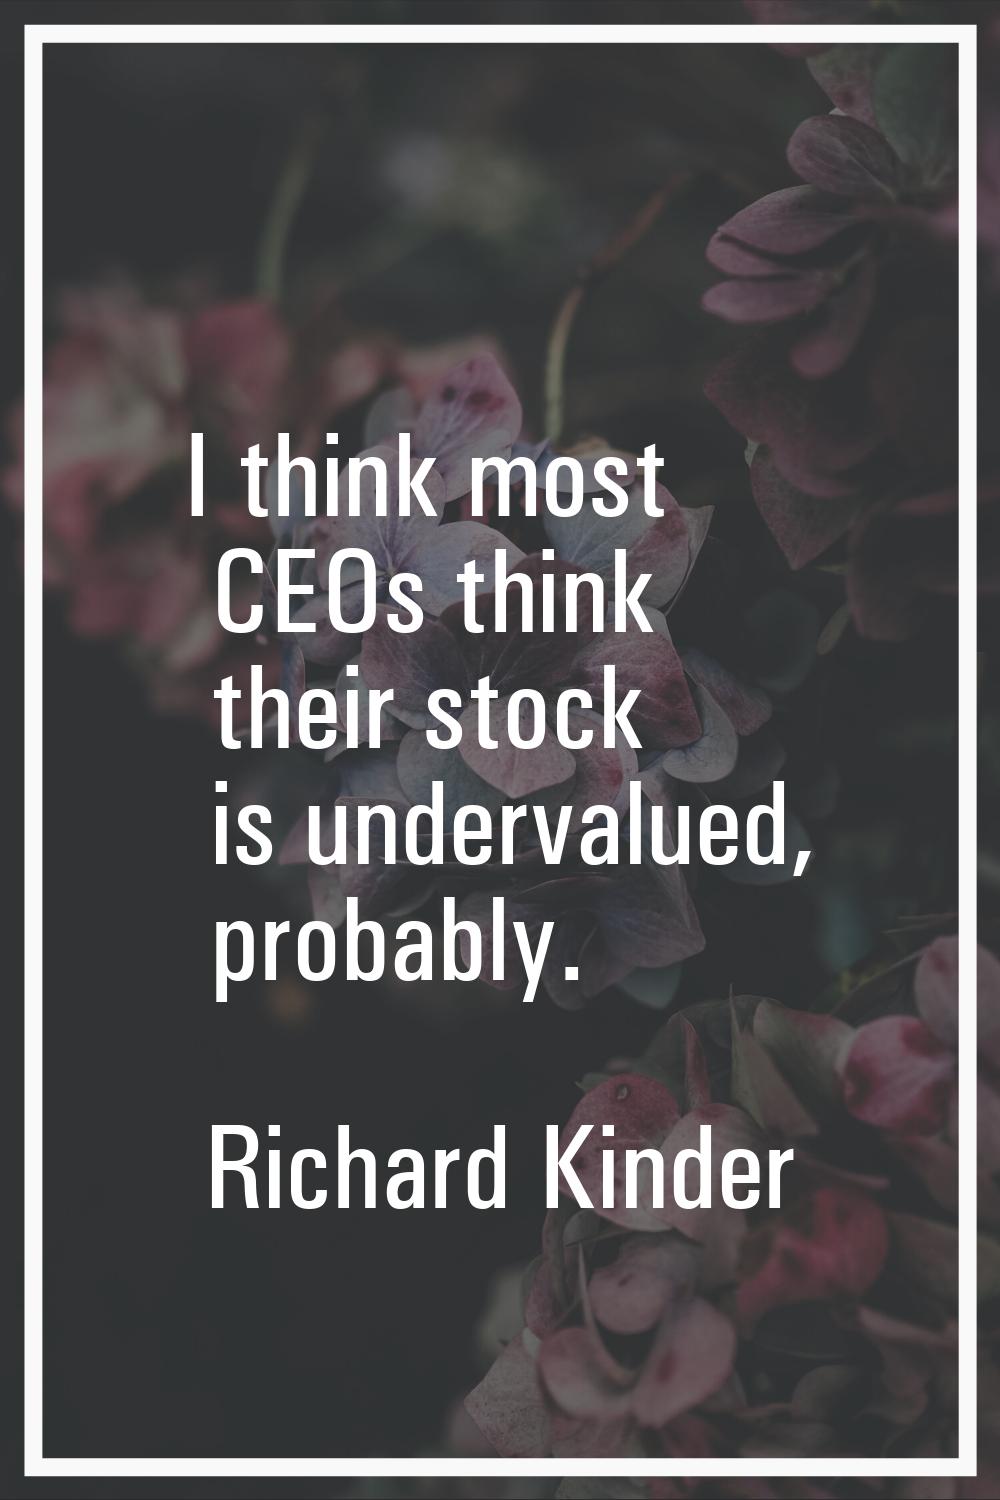 I think most CEOs think their stock is undervalued, probably.